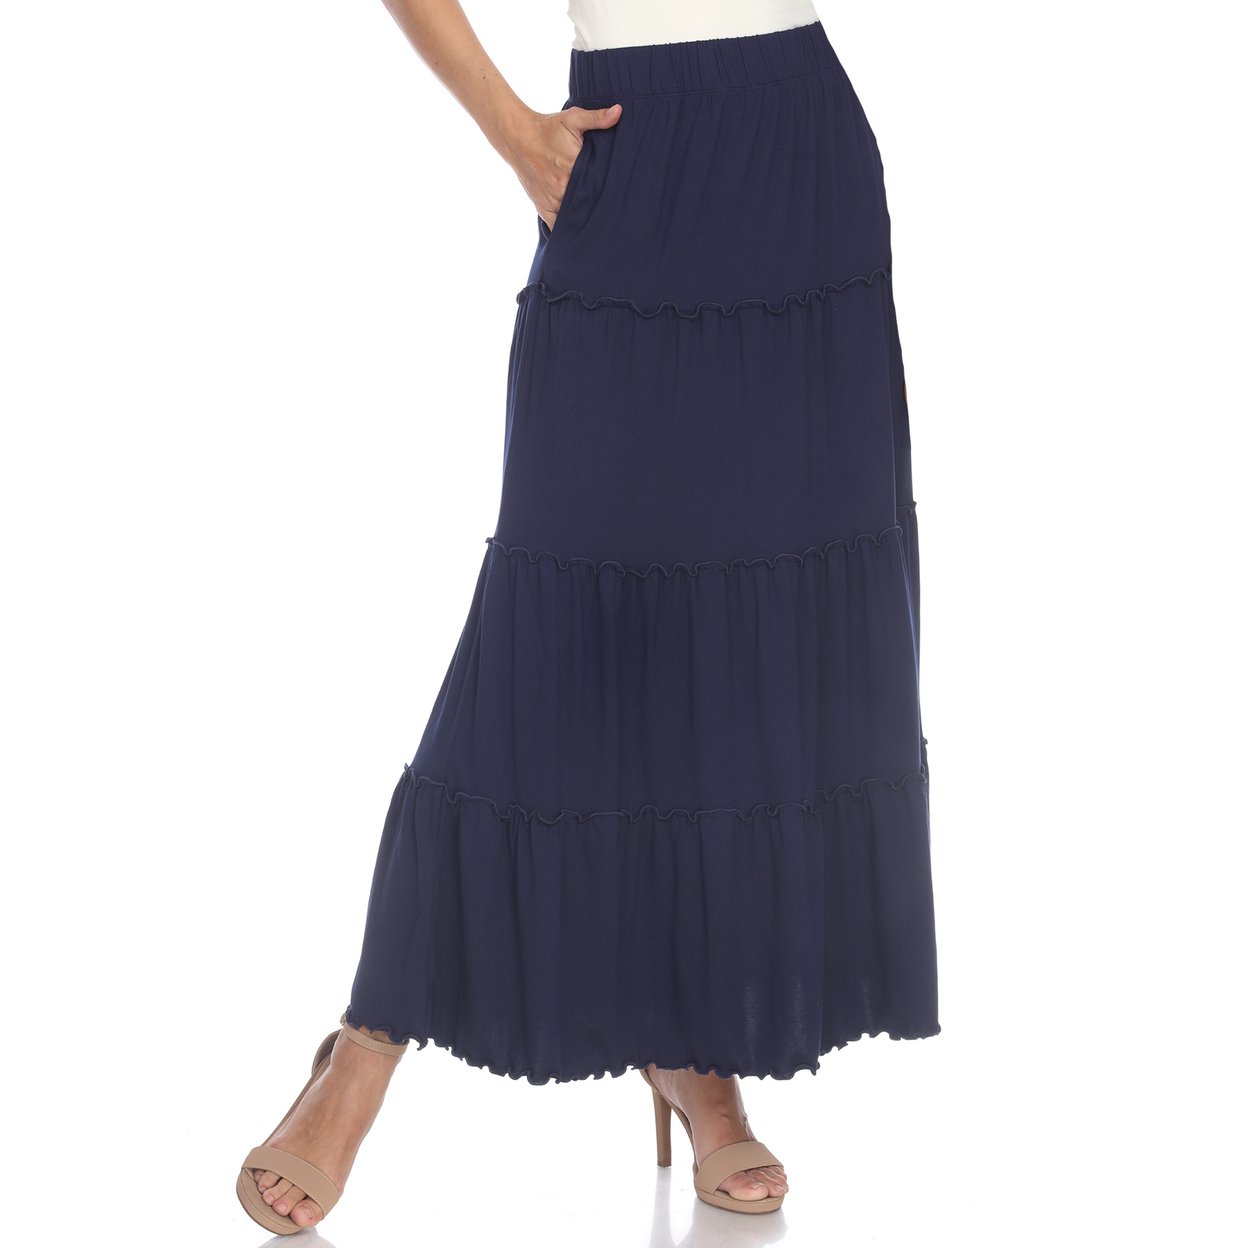 White Mark Women's Tiered Maxi Skirt With Pockets - Denim Blue, Small